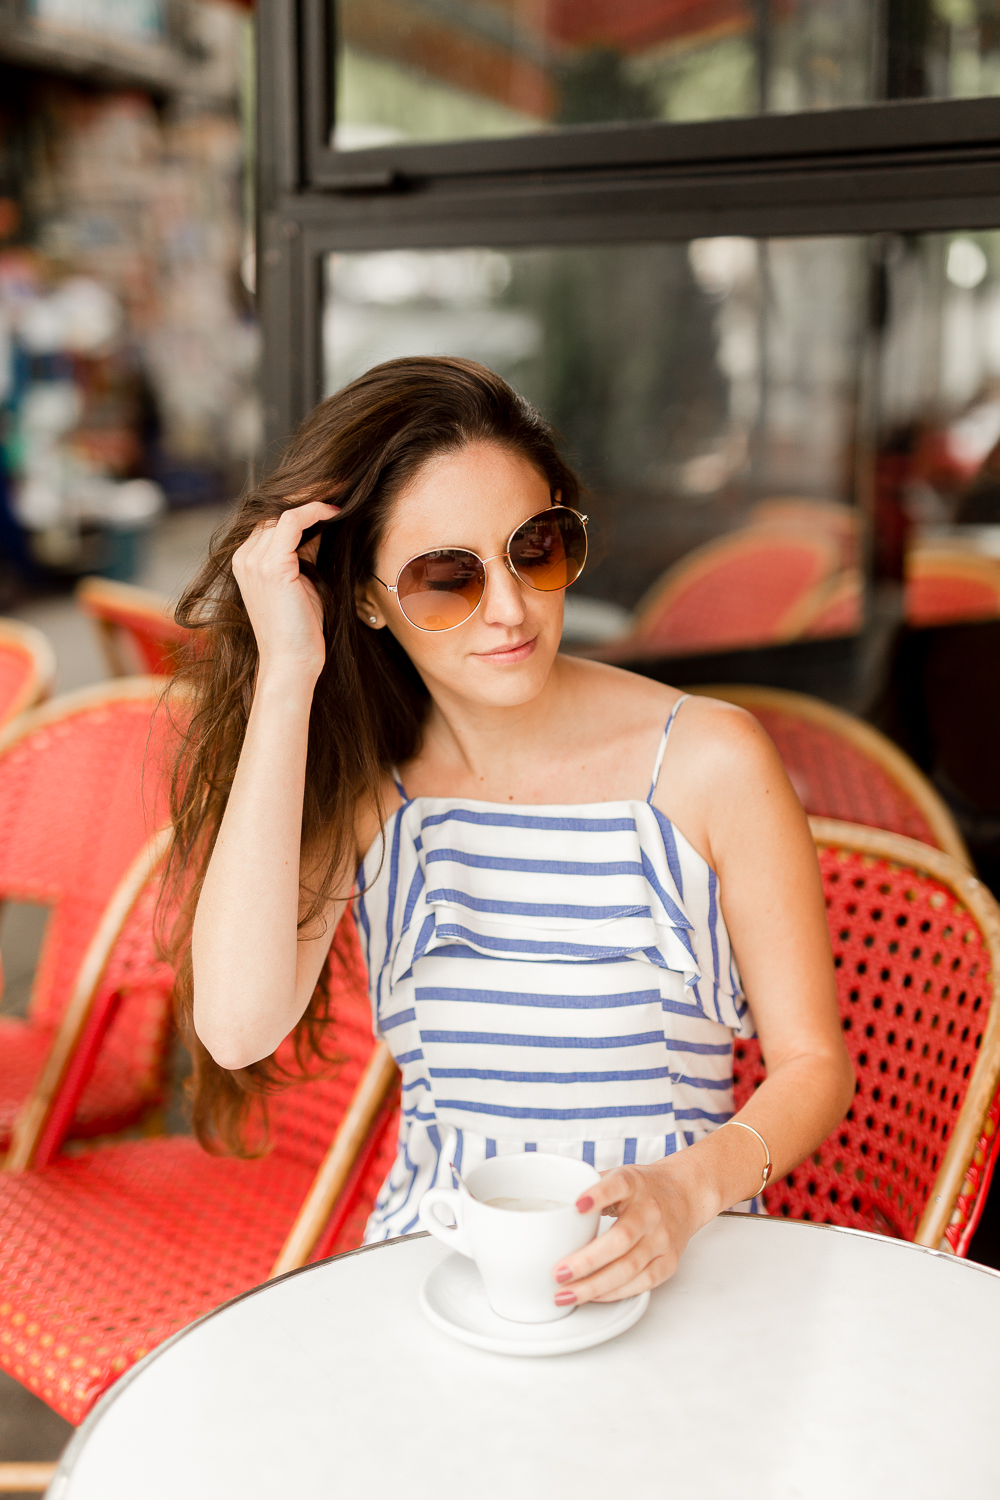 How to style a jumpsuit, cafes in paris, what to do in paris, how to wear a jumpsuit, what to wear in paris, what to wear in europe, summer outfit ideas, spring outfit ideas, spring style, summer style, round gold sunglasses